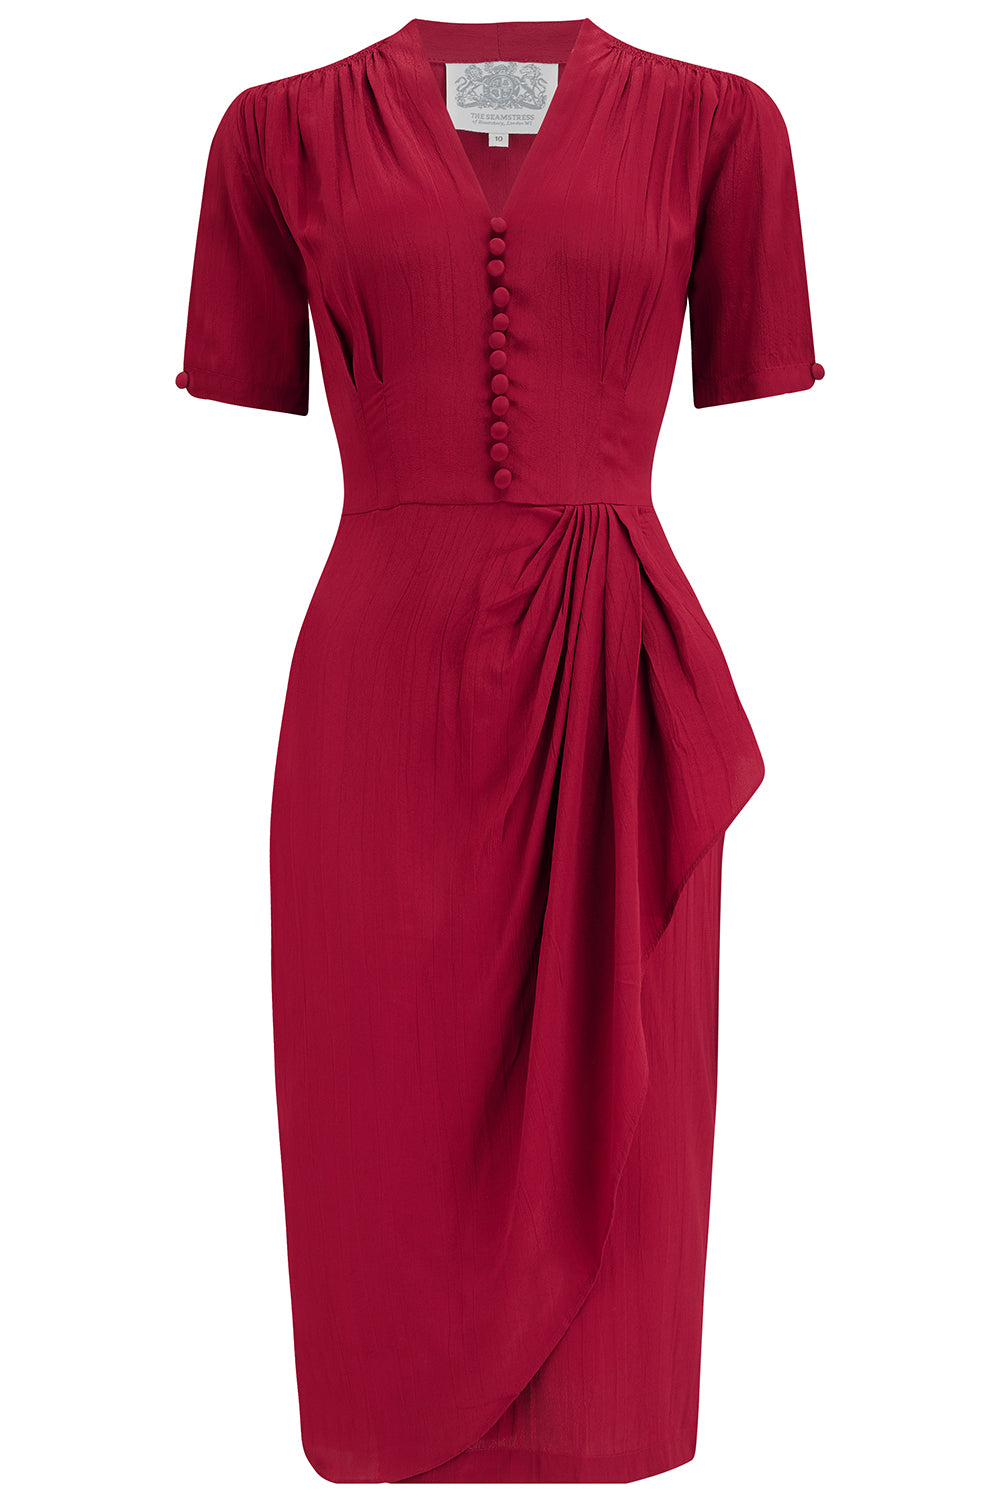 "Mabel dress " Wine , A Classic 1940s Inspired Vintage Style CC41 By The Seamstress Of Bloomsbury product